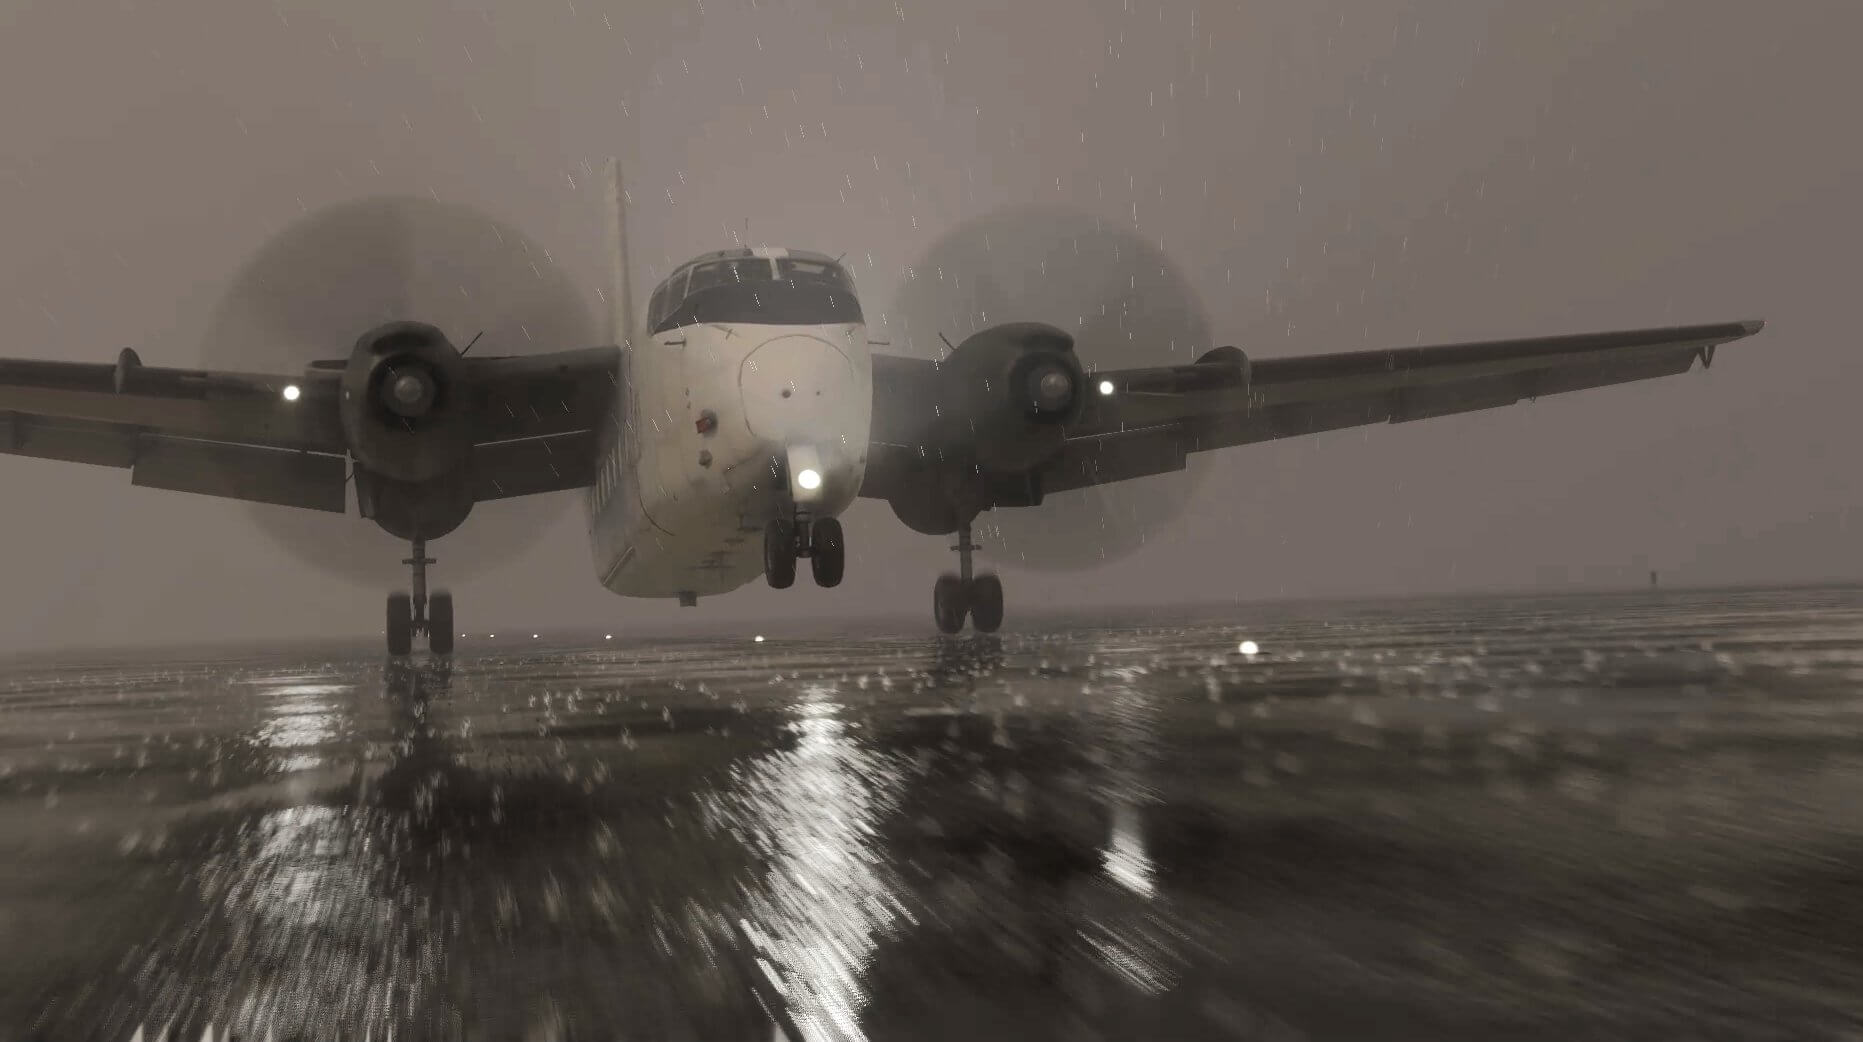 A dual engine turbo-prop aircraft touches down in heavy rain on an extremely wet runway.